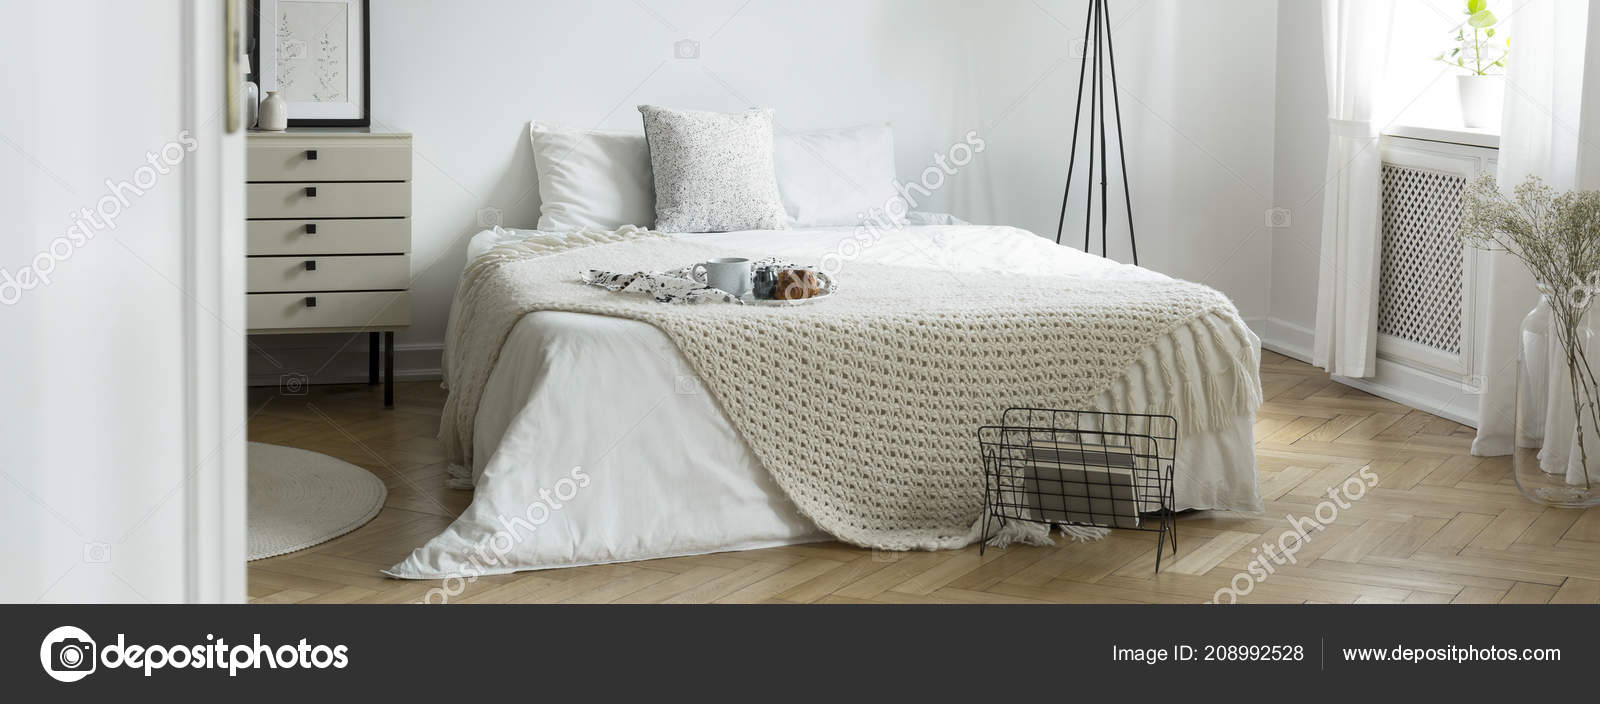 King Size Bed White Bedding Knit Coverlet Croissant Coffee Mug